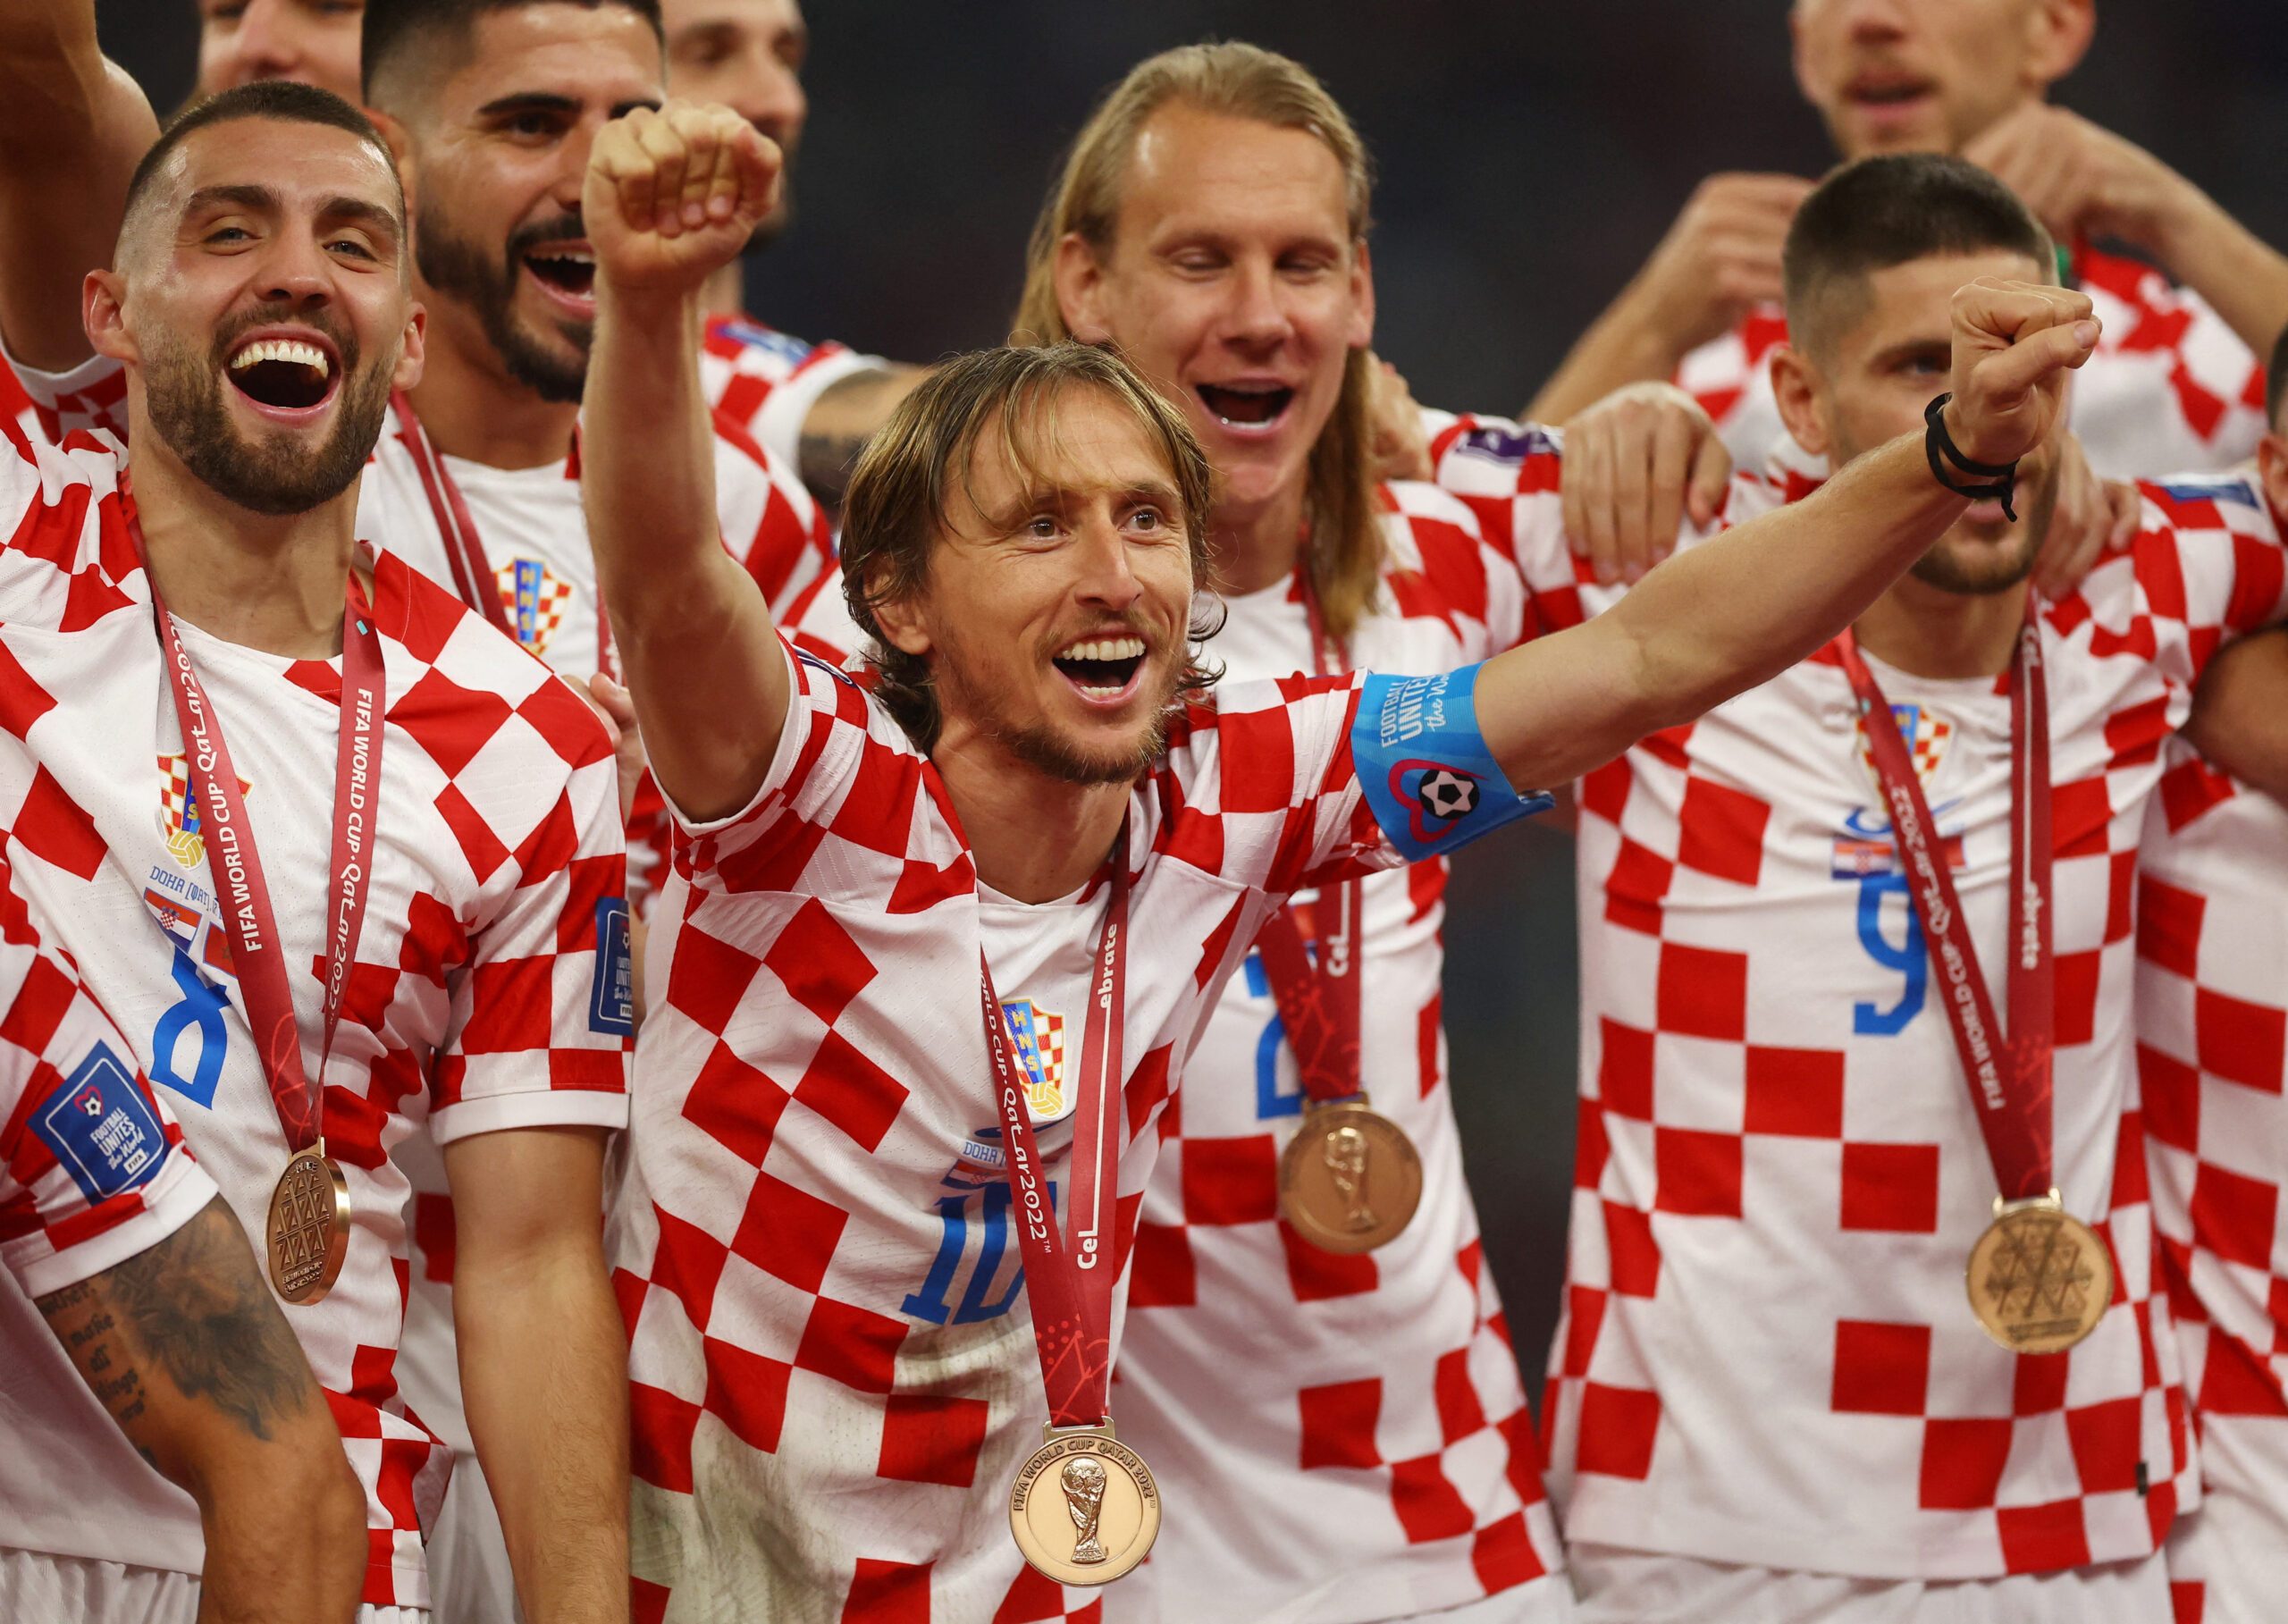 Croatia proud of World Cup 3rd place, expects bright future